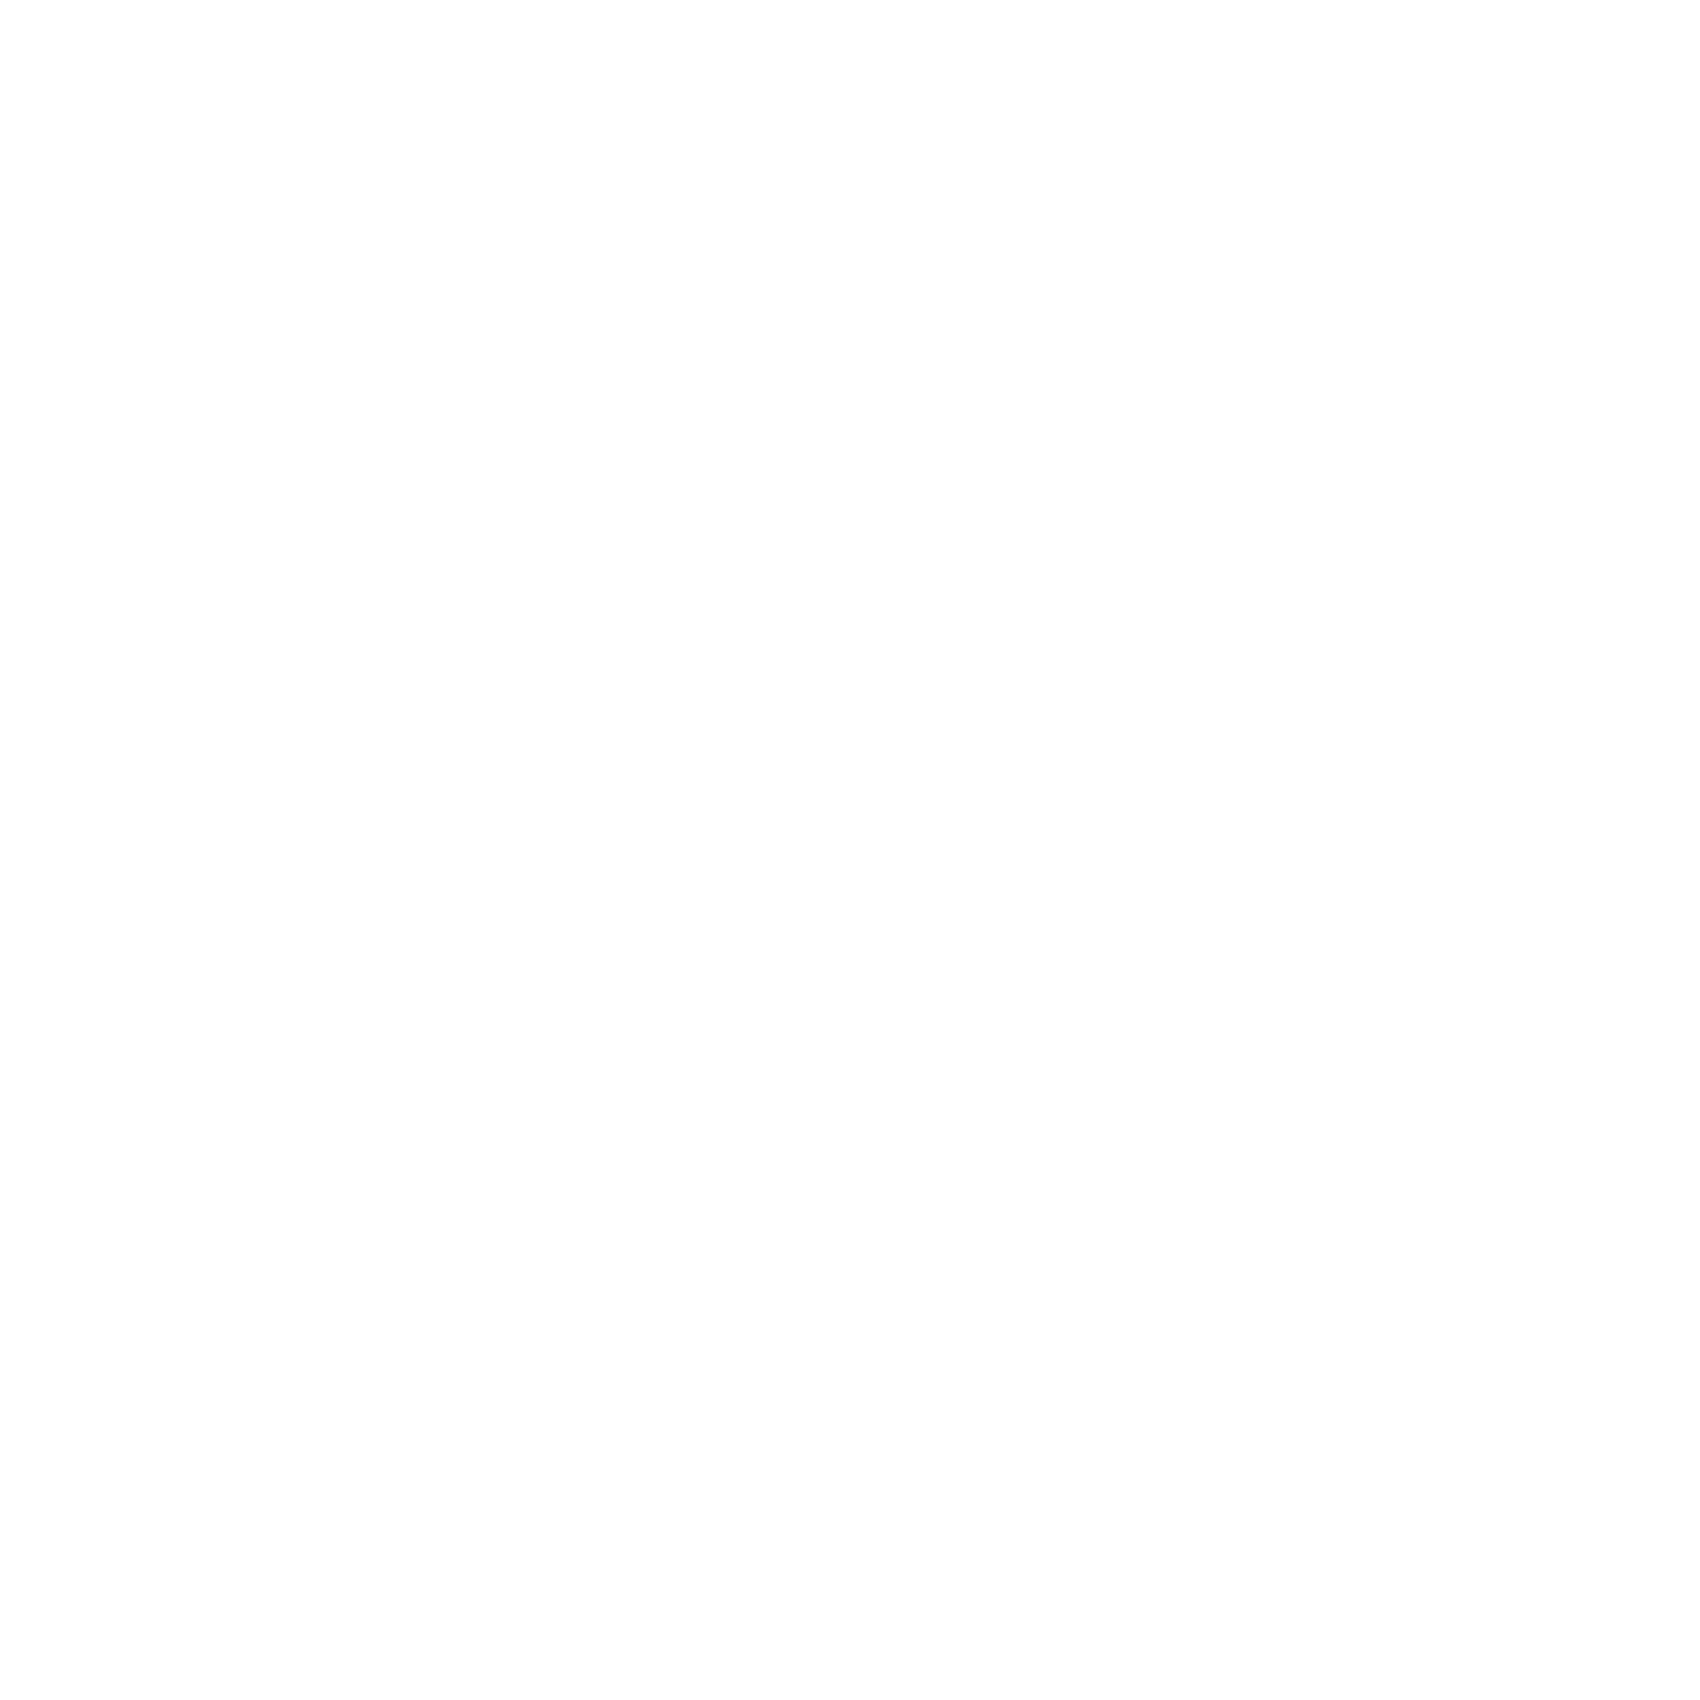 Tata Consultancy Services (TCS): Business 4.0